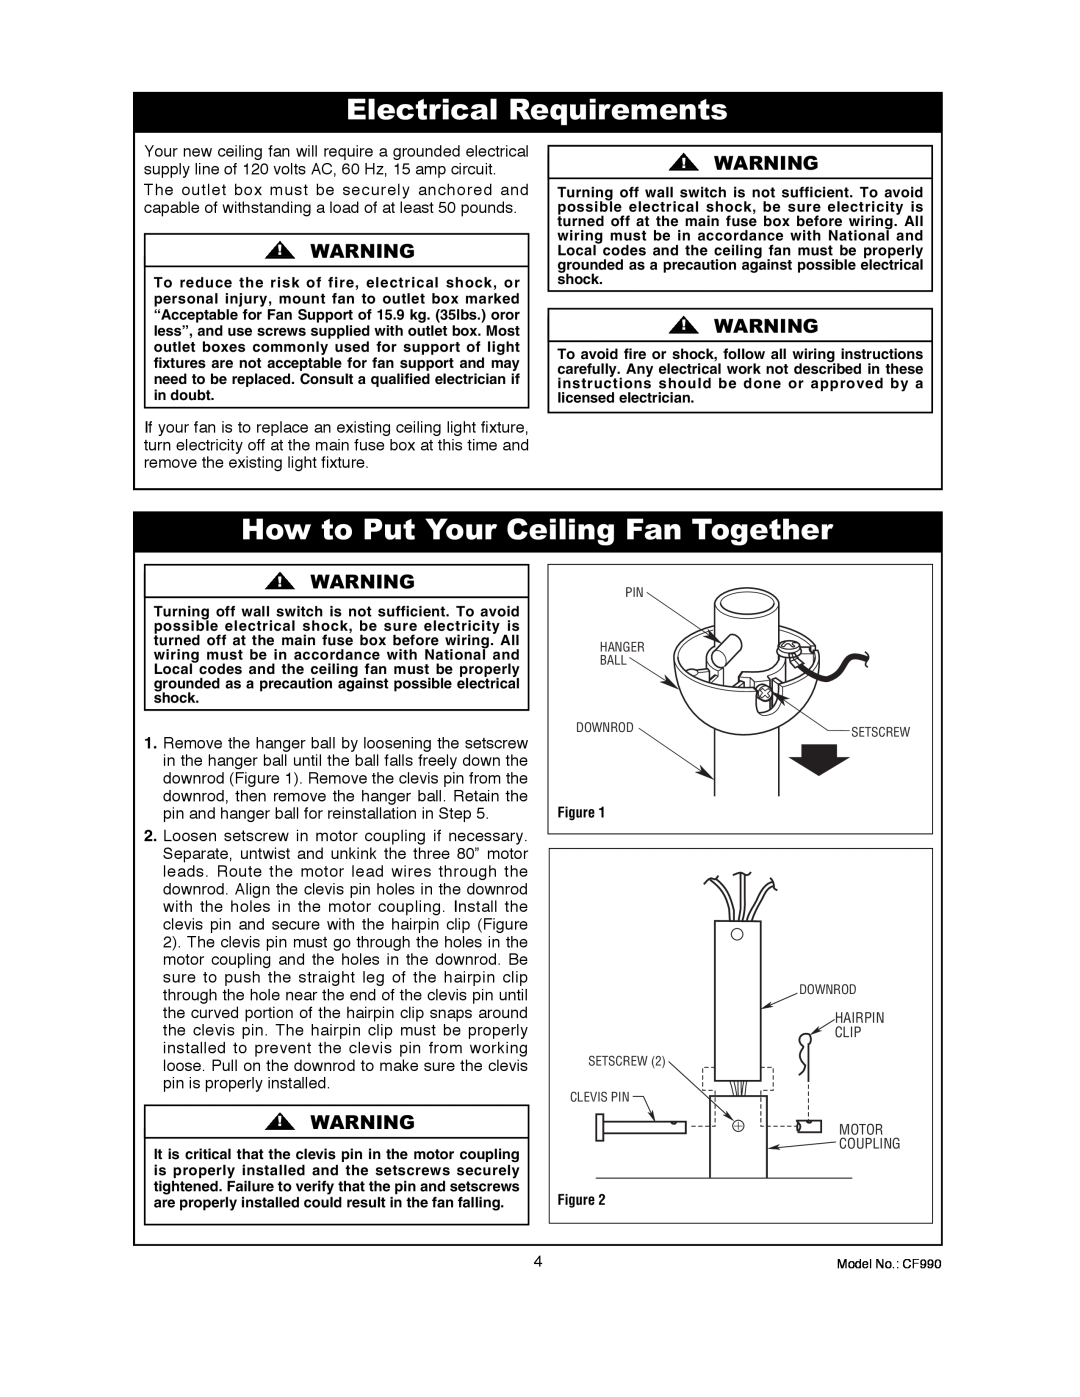 Emerson CF990BS00, CF990VNB00 owner manual Electrical Requirements, How to Put Your Ceiling Fan Together 